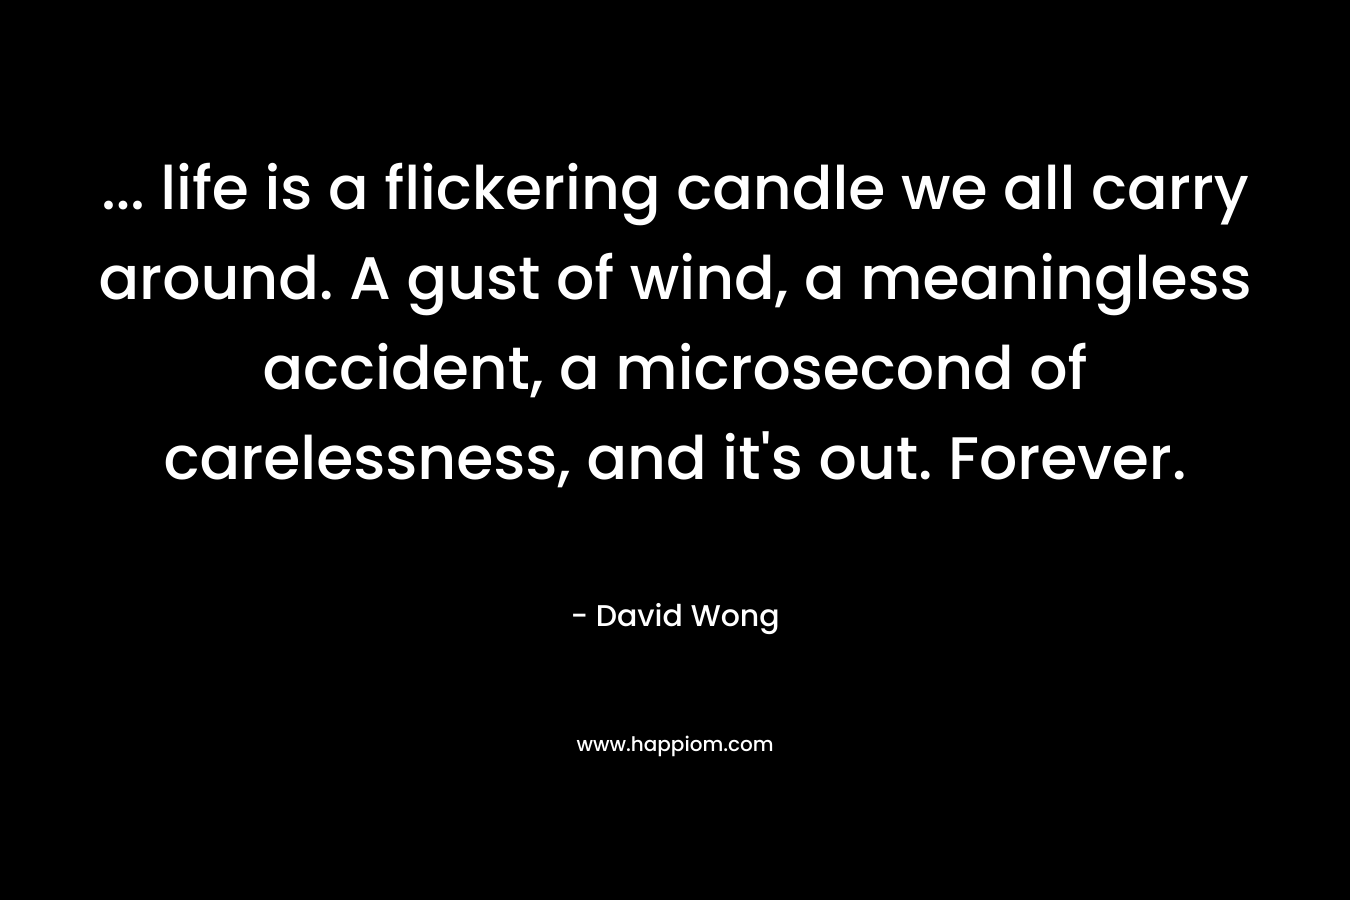 … life is a flickering candle we all carry around. A gust of wind, a meaningless accident, a microsecond of carelessness, and it’s out. Forever. – David Wong